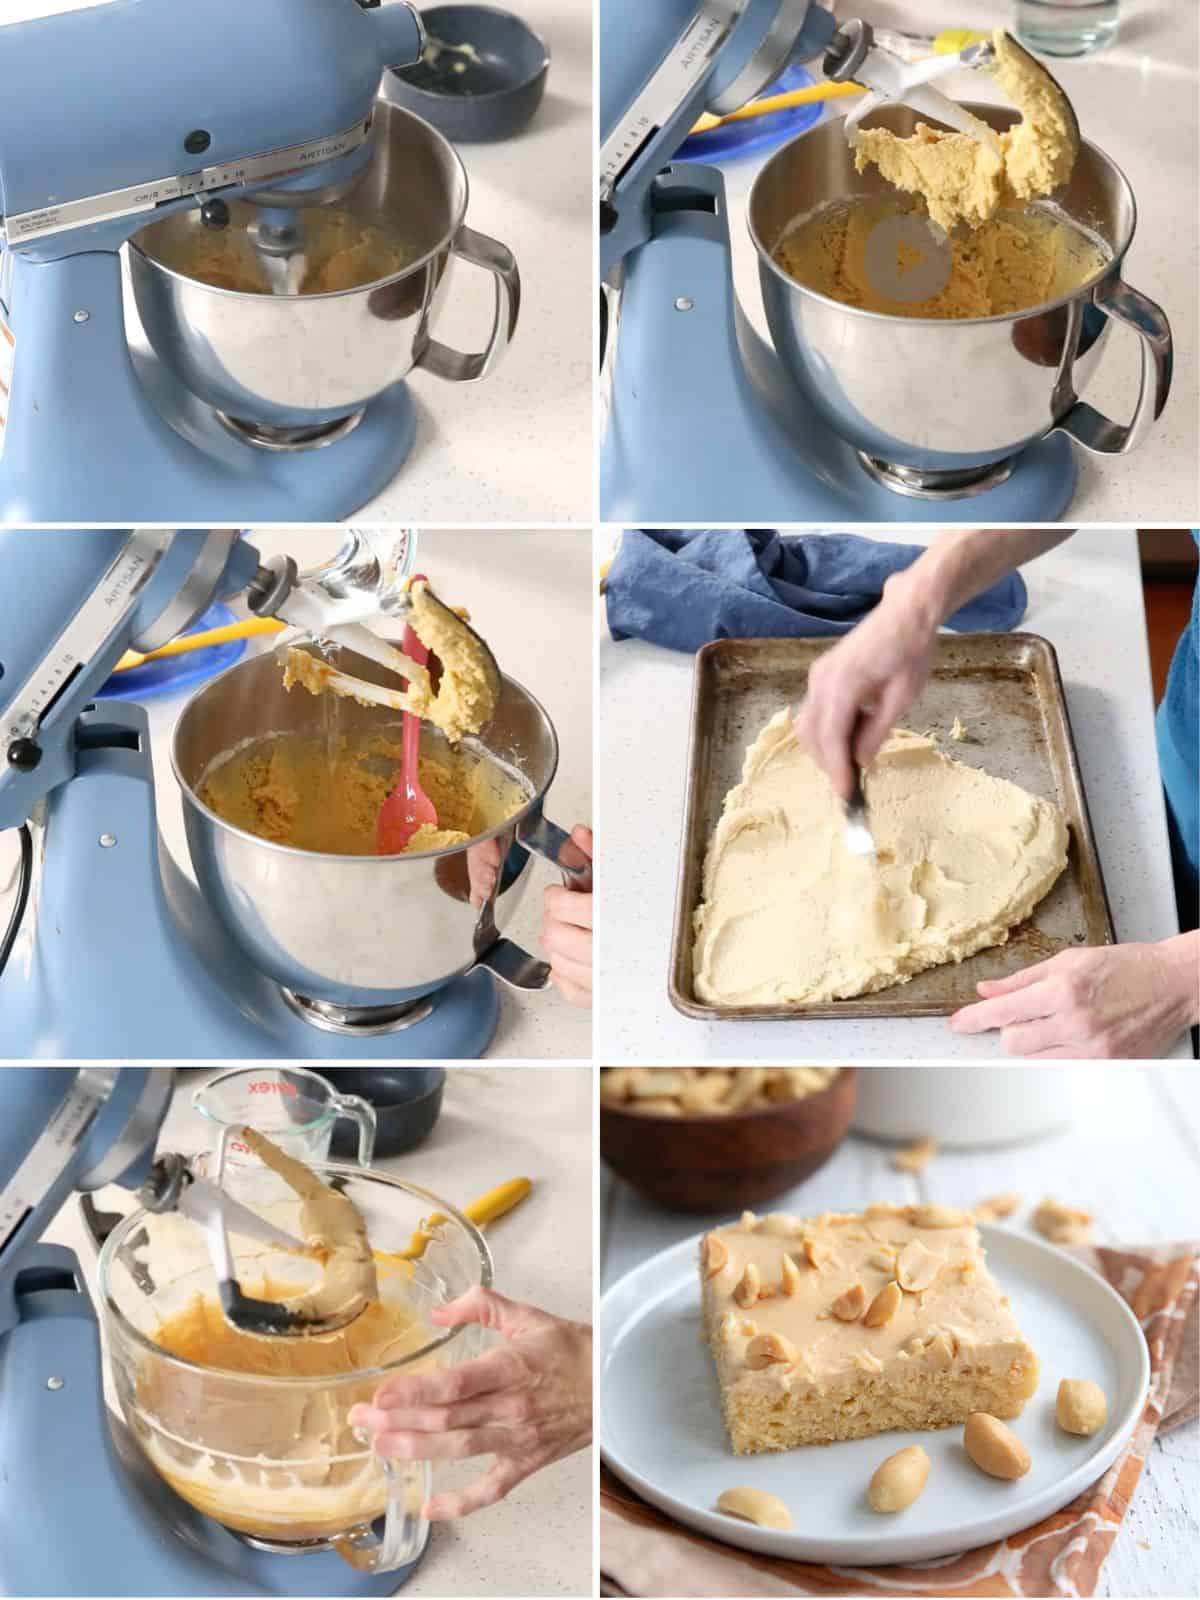 A collage of 6 images showing how to make Keto Peanut Butter Sheet Cake.